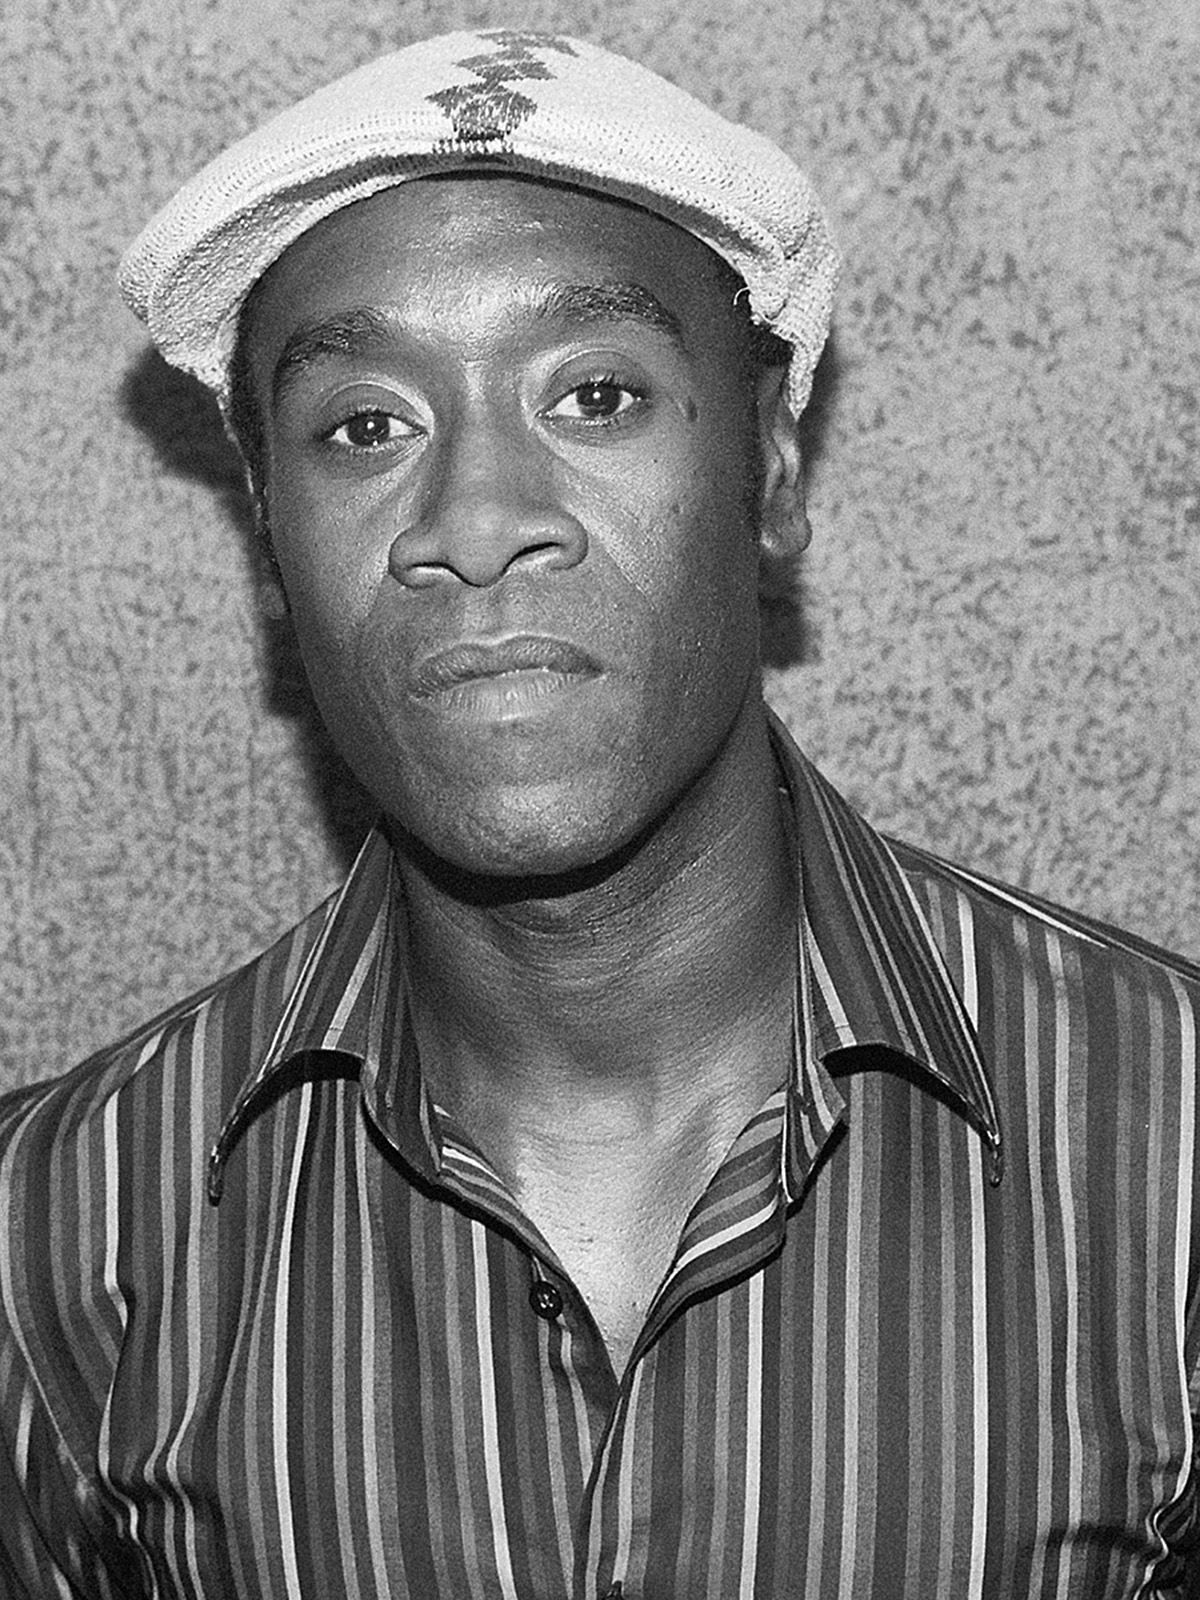 Out of the Archives, 2004: Don Cheadle on “Hotel Rwanda” - Golden Globes